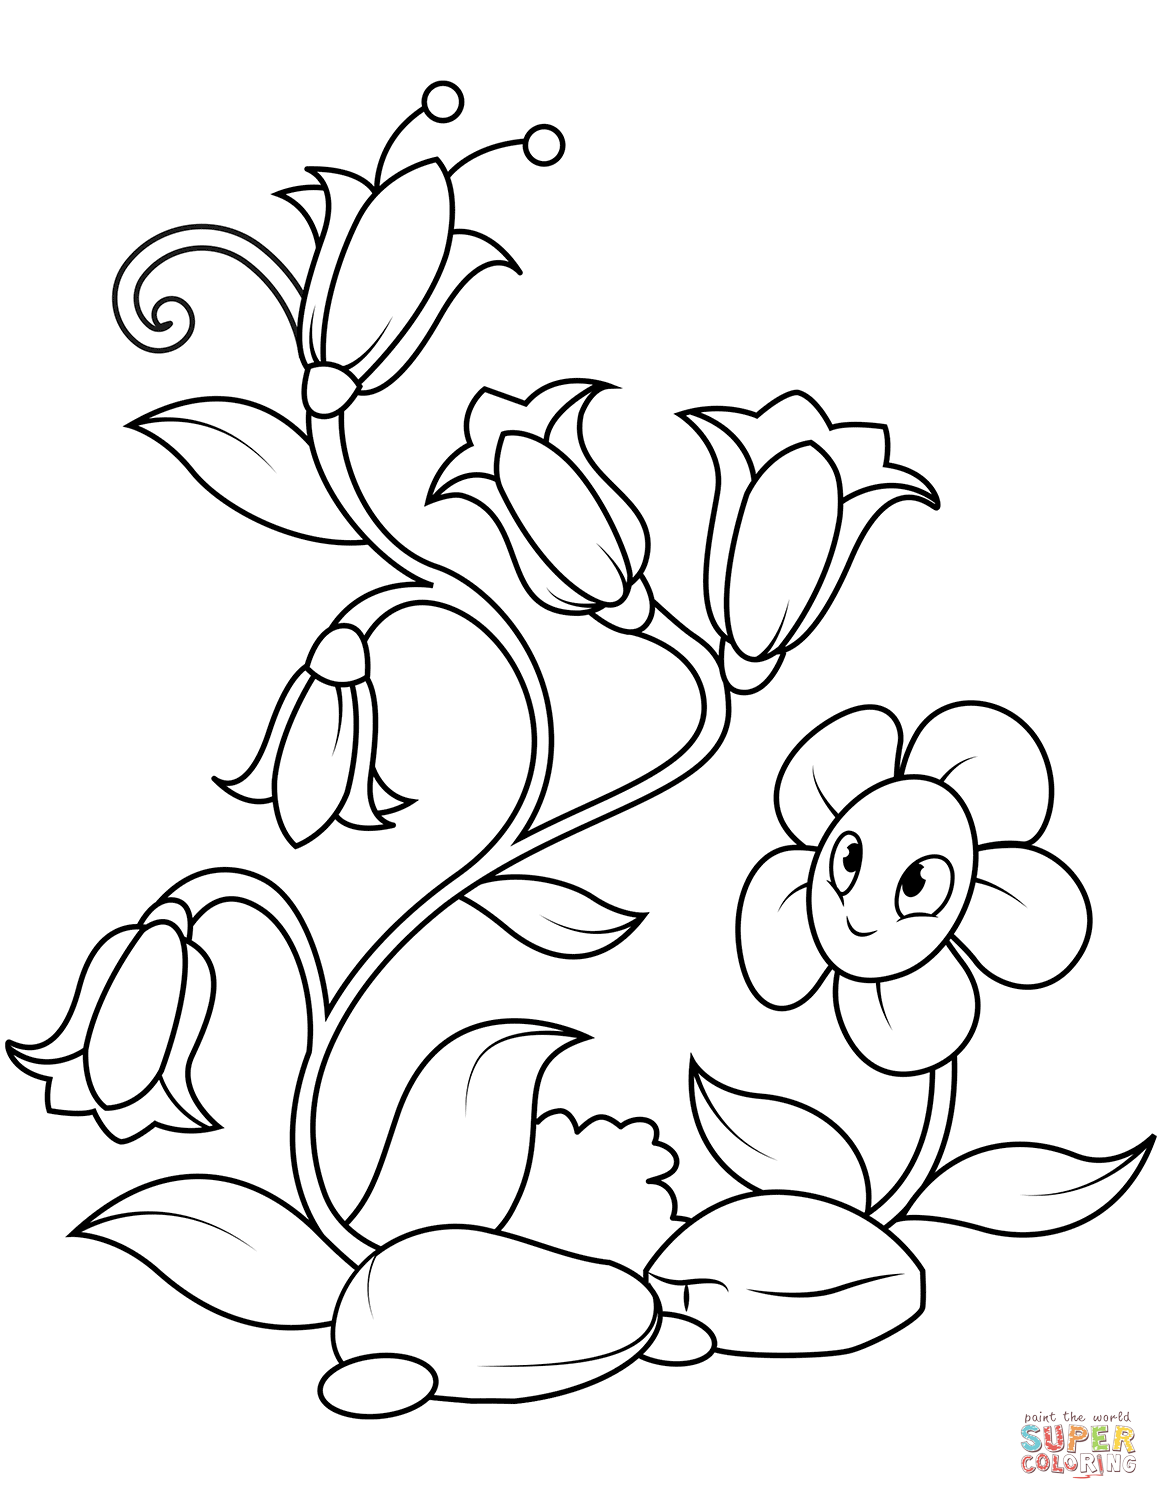 Bellflowers and Funny Flower Character Coloring Pages